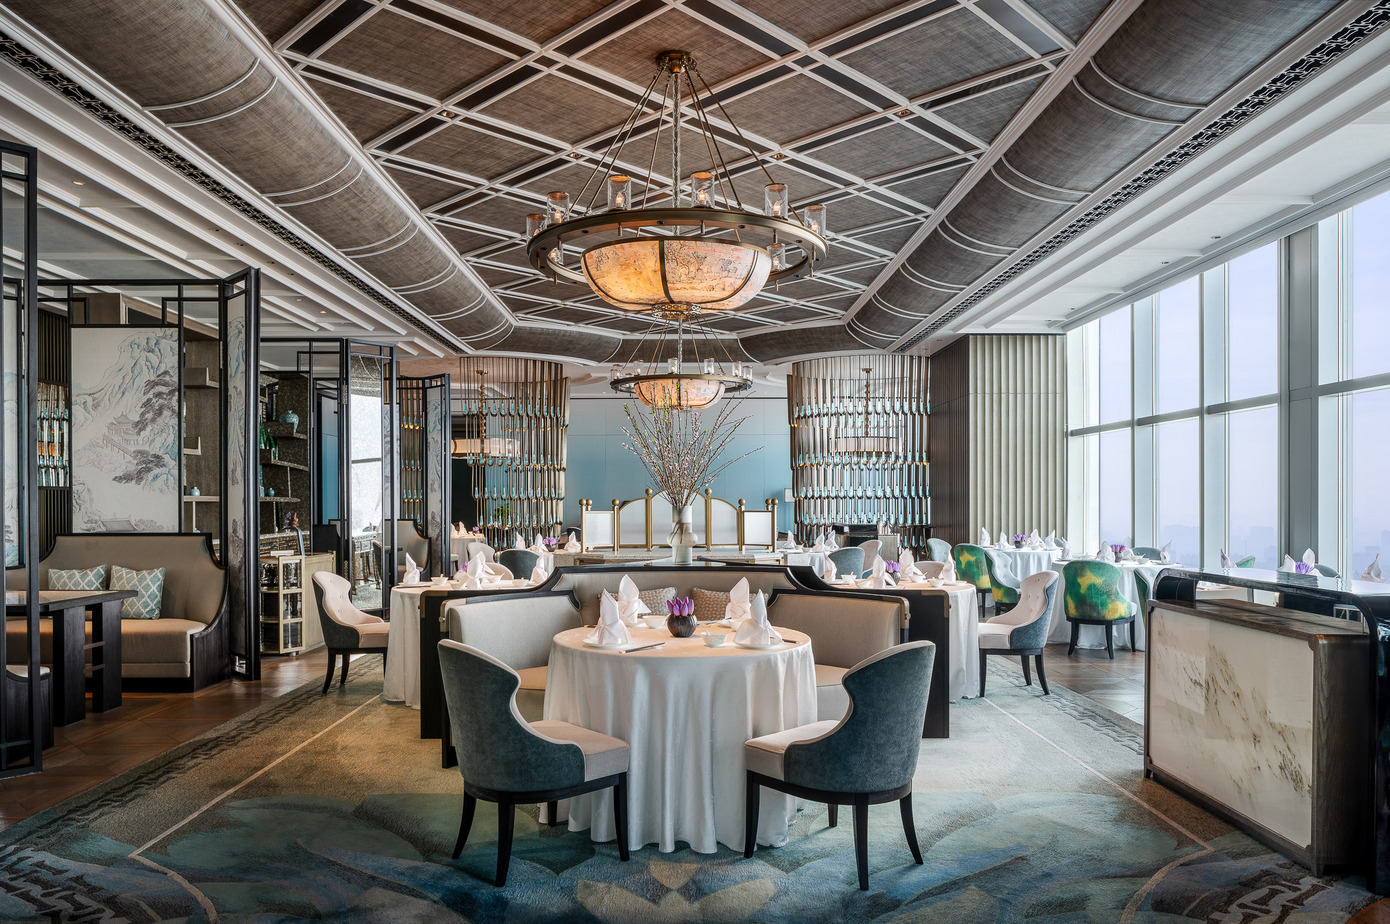 Manor 54 in The Ritz-Carlton: Luxury Dining Redefined